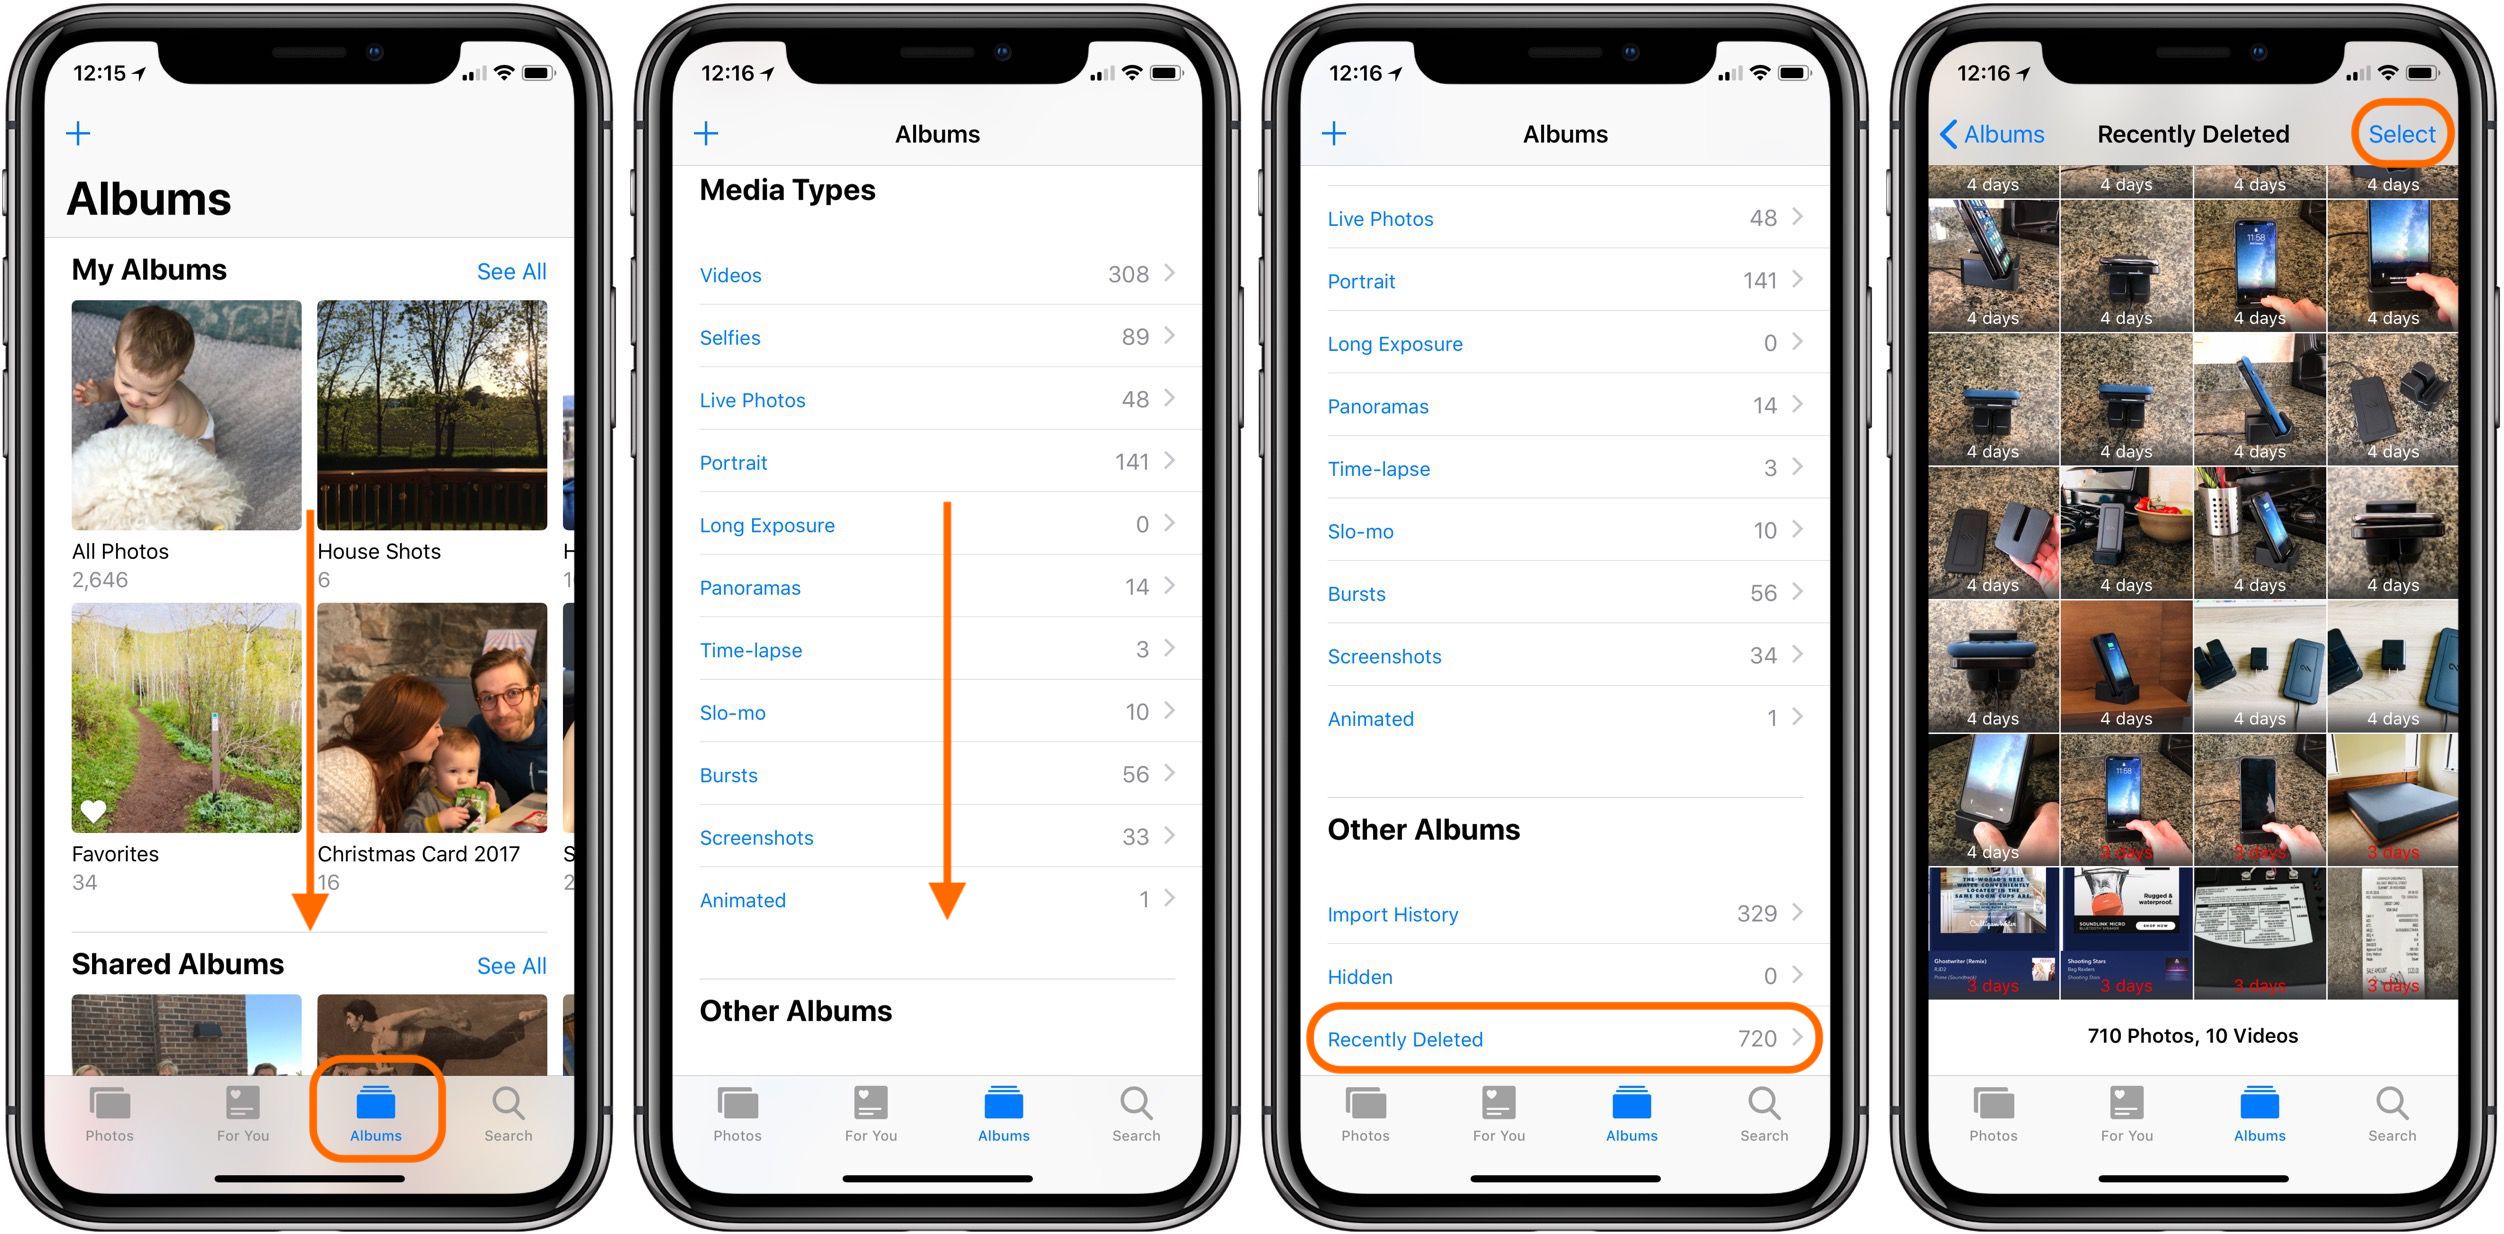 iOS 12: How to permanently delete photos on iPhone